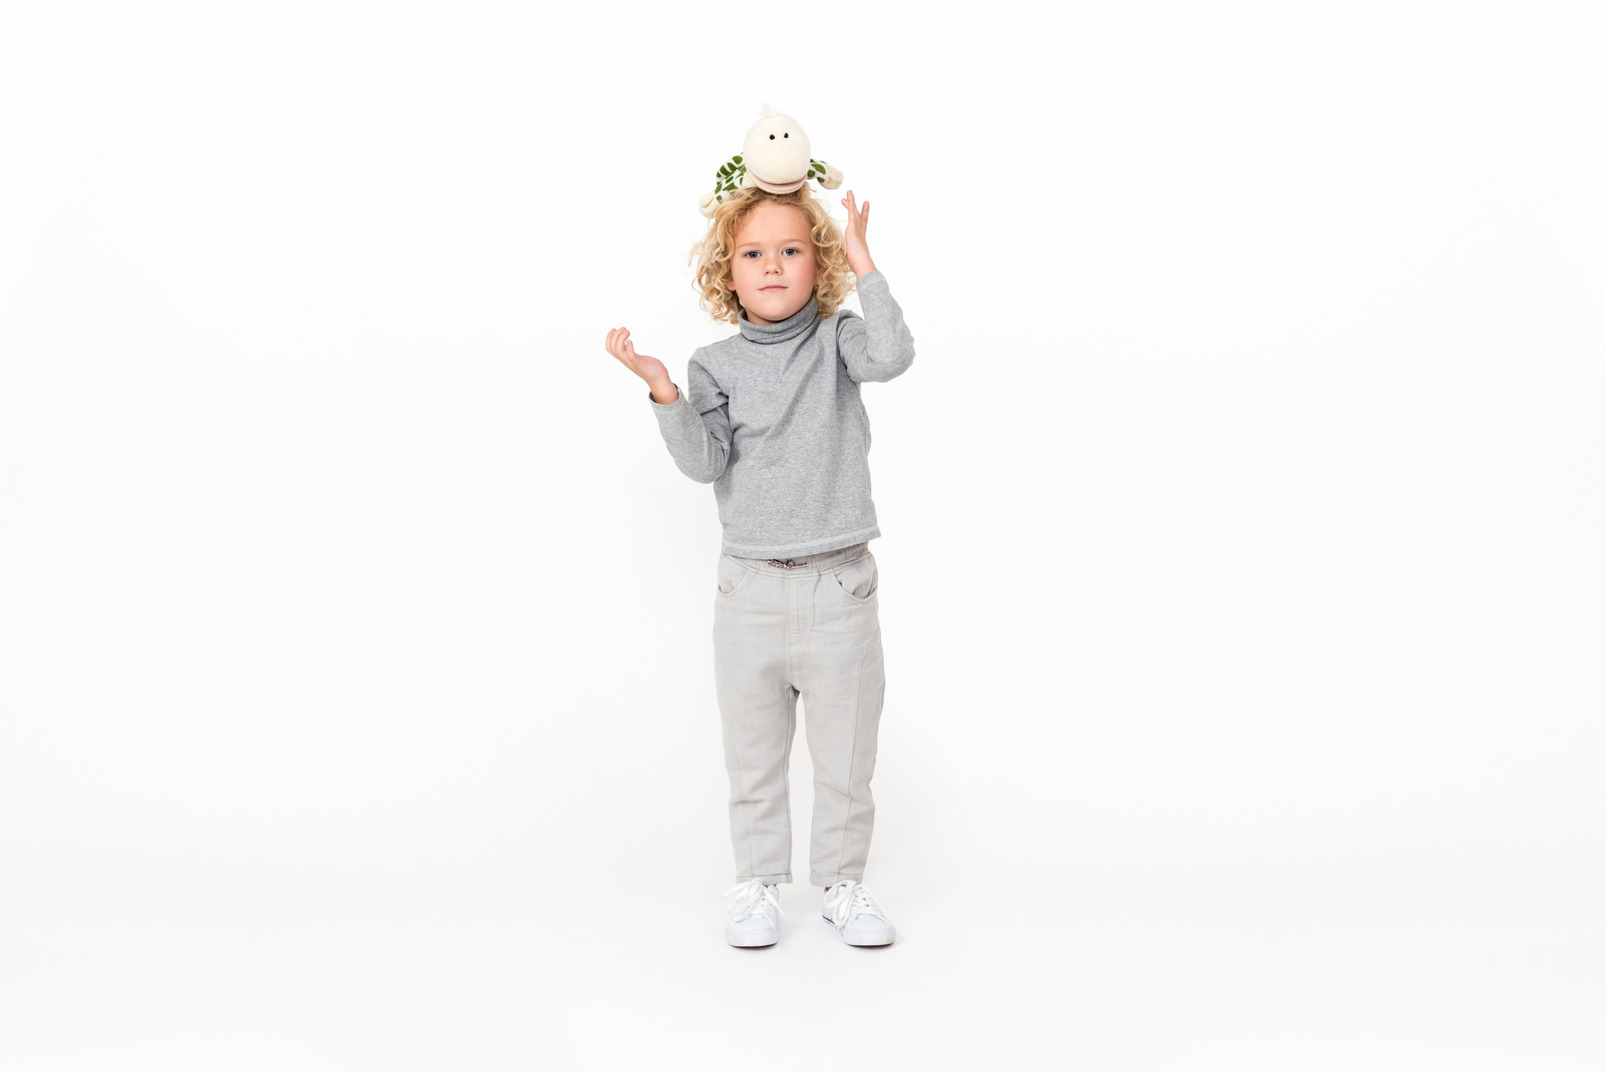 Kid boy standing with toy on his head